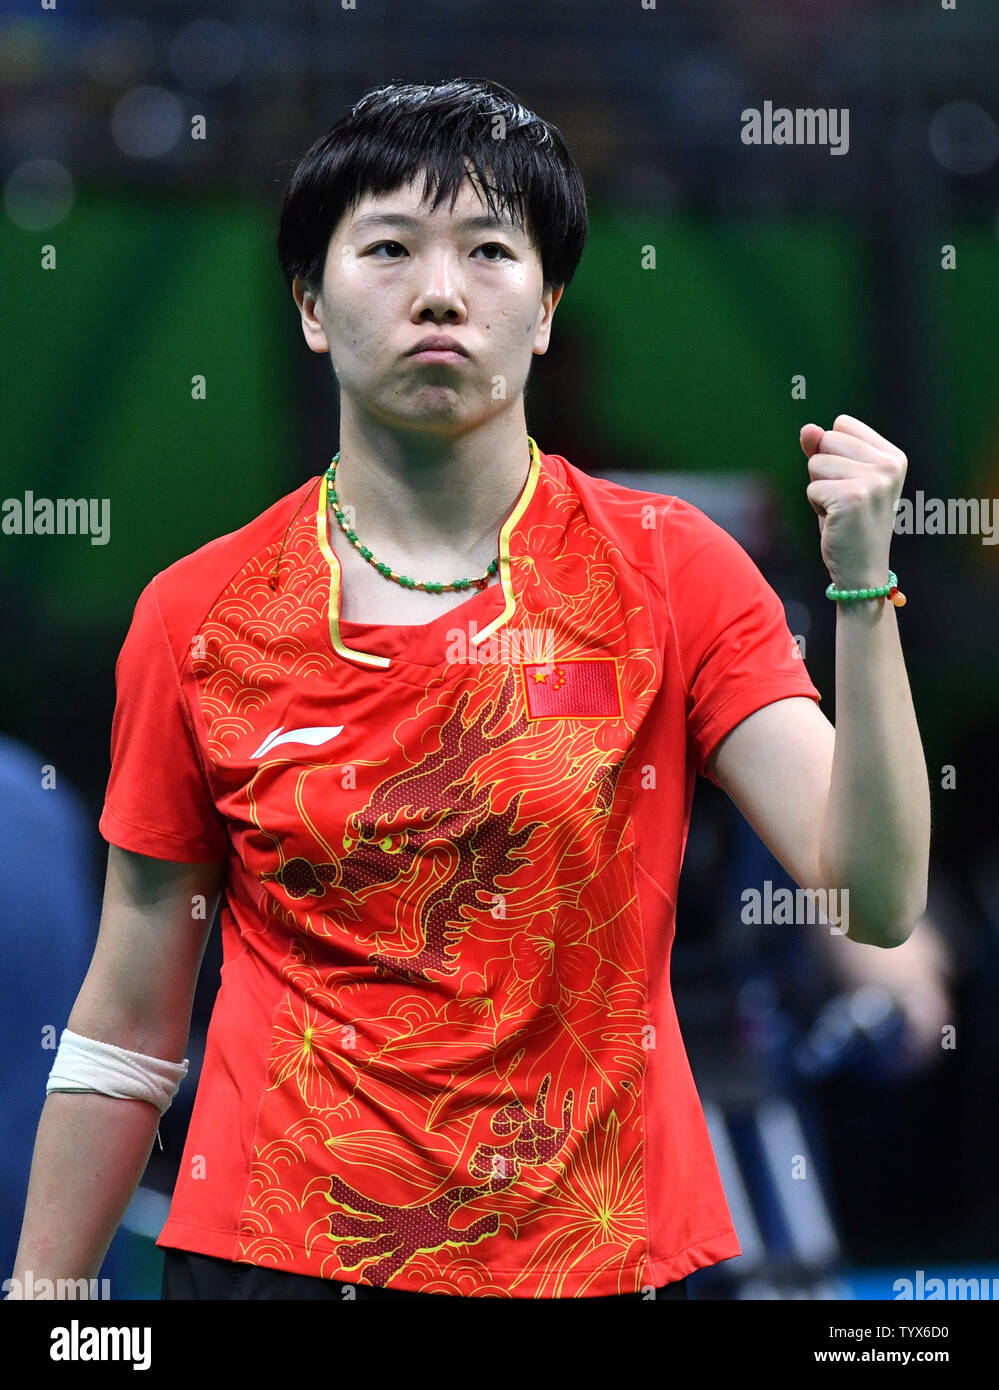 China's Li Xiaoxia celebrates after scoring in her table tennis match at the 2016 Rio Summer Olympics in Rio de Janeiro, Brazil, August 8, 2016. Photo by Kevin Dietsch/UPI Stock Photo